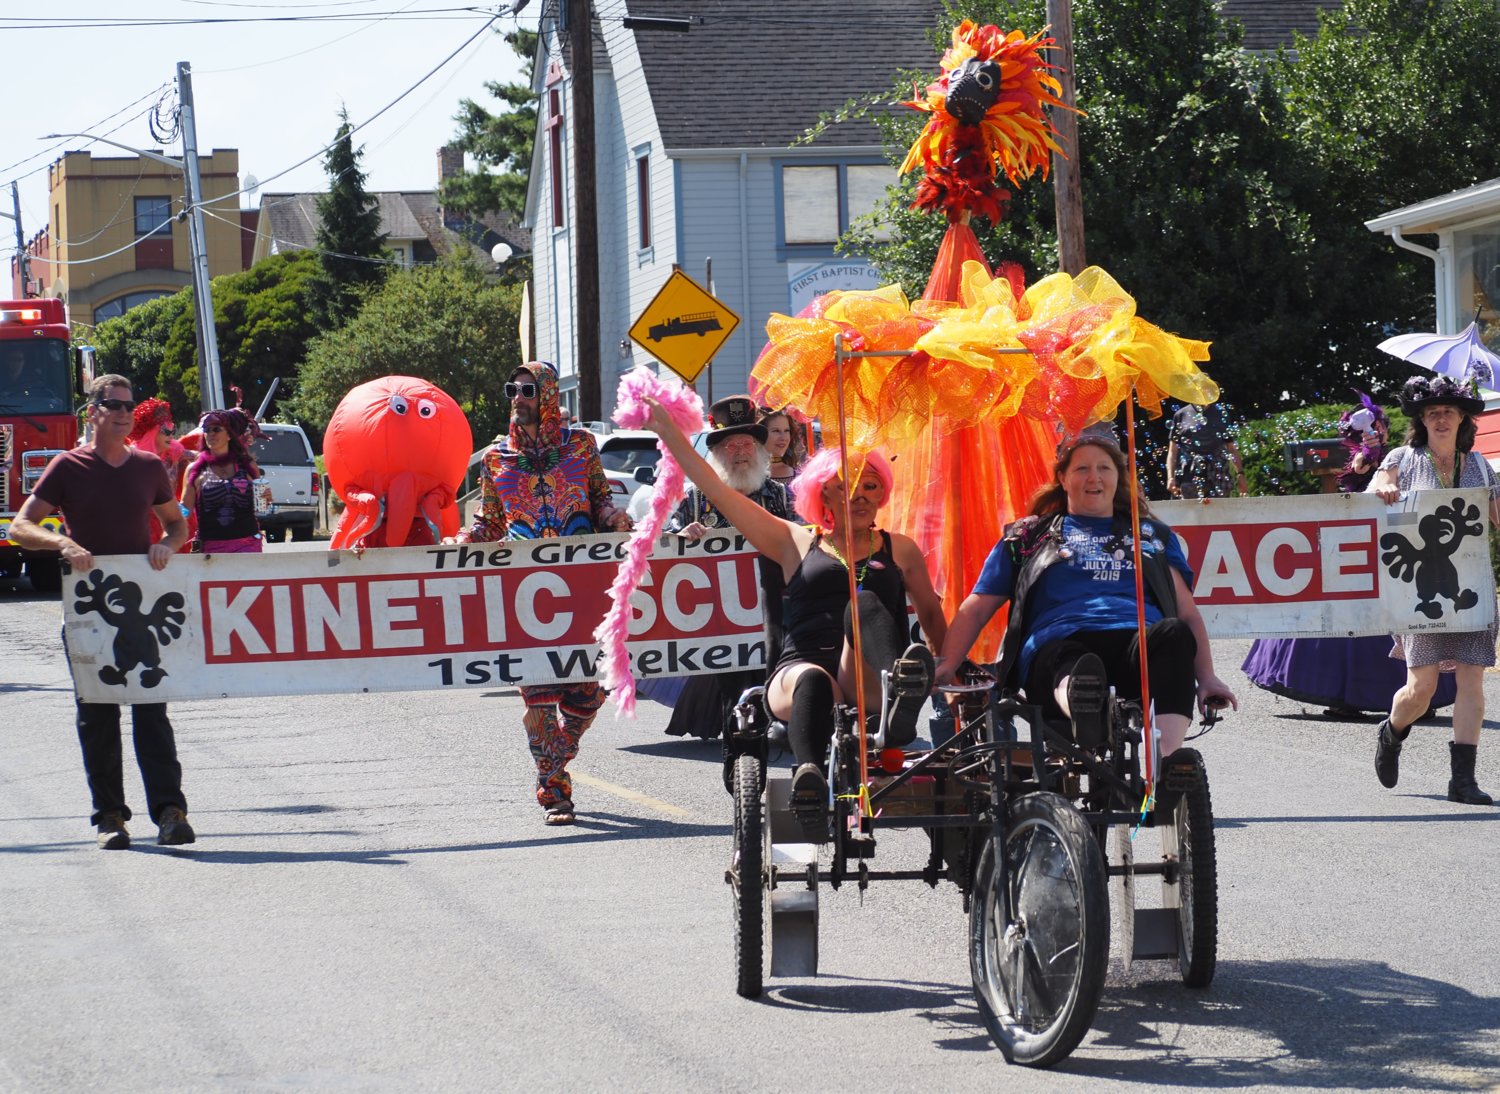 Representatives for the Kinetic Sculpture Race, held the first weekend of October, strut their stuff in the Grandly Local Parade.